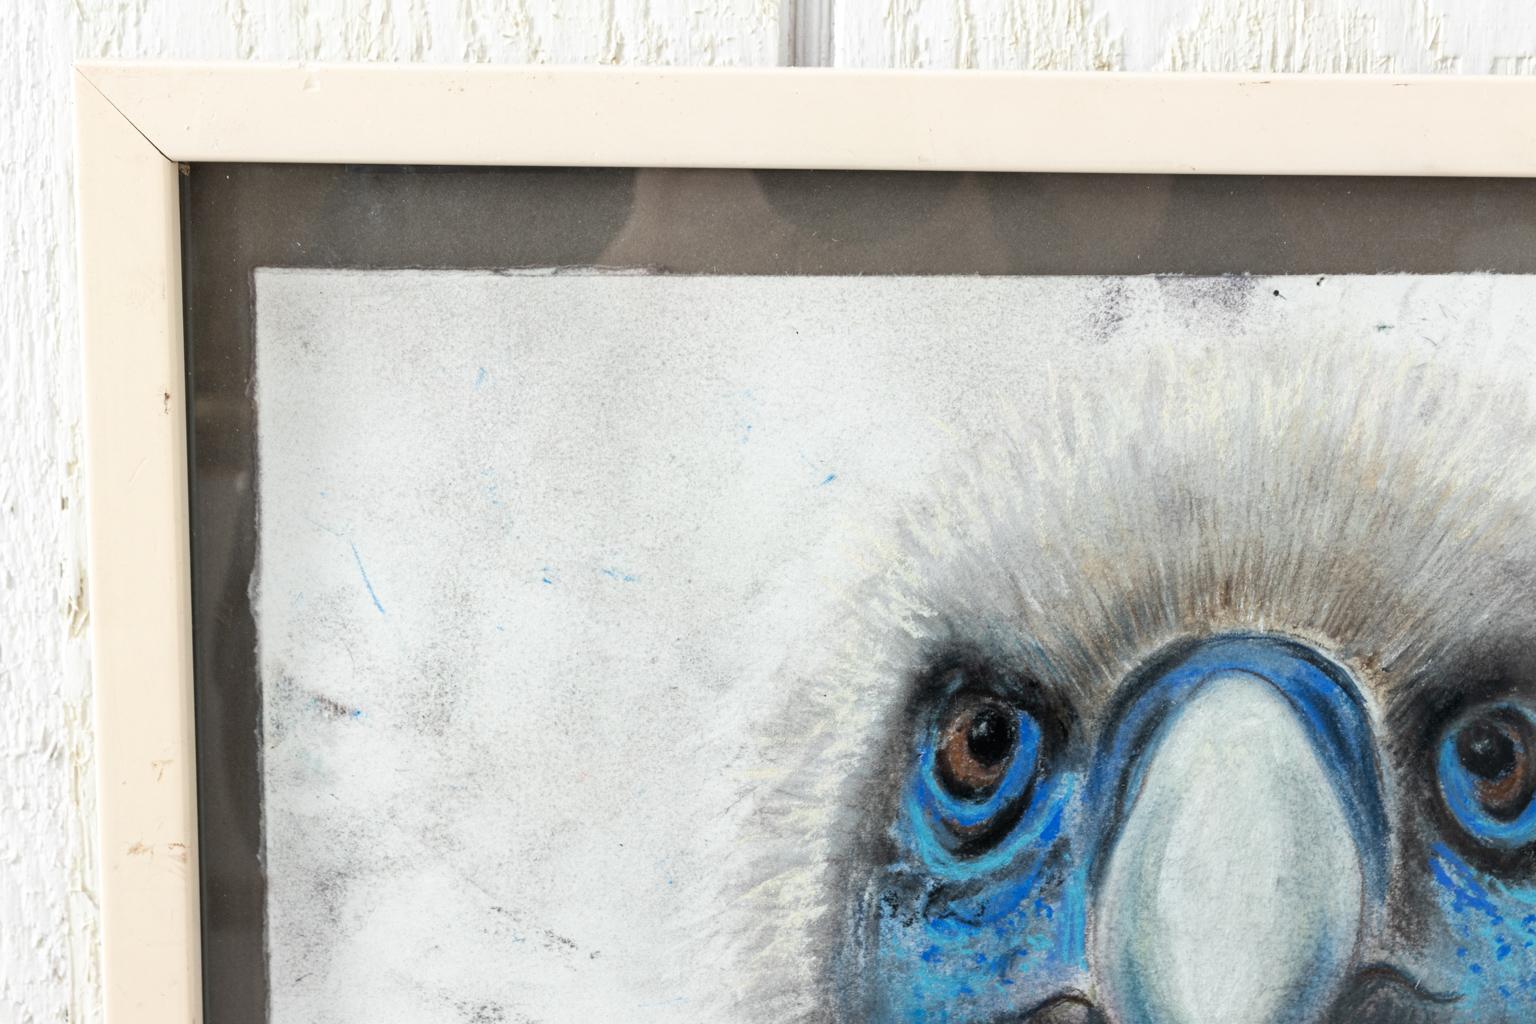 Framed close up illustration of a bird's head by Marianne Stikas based on the series 